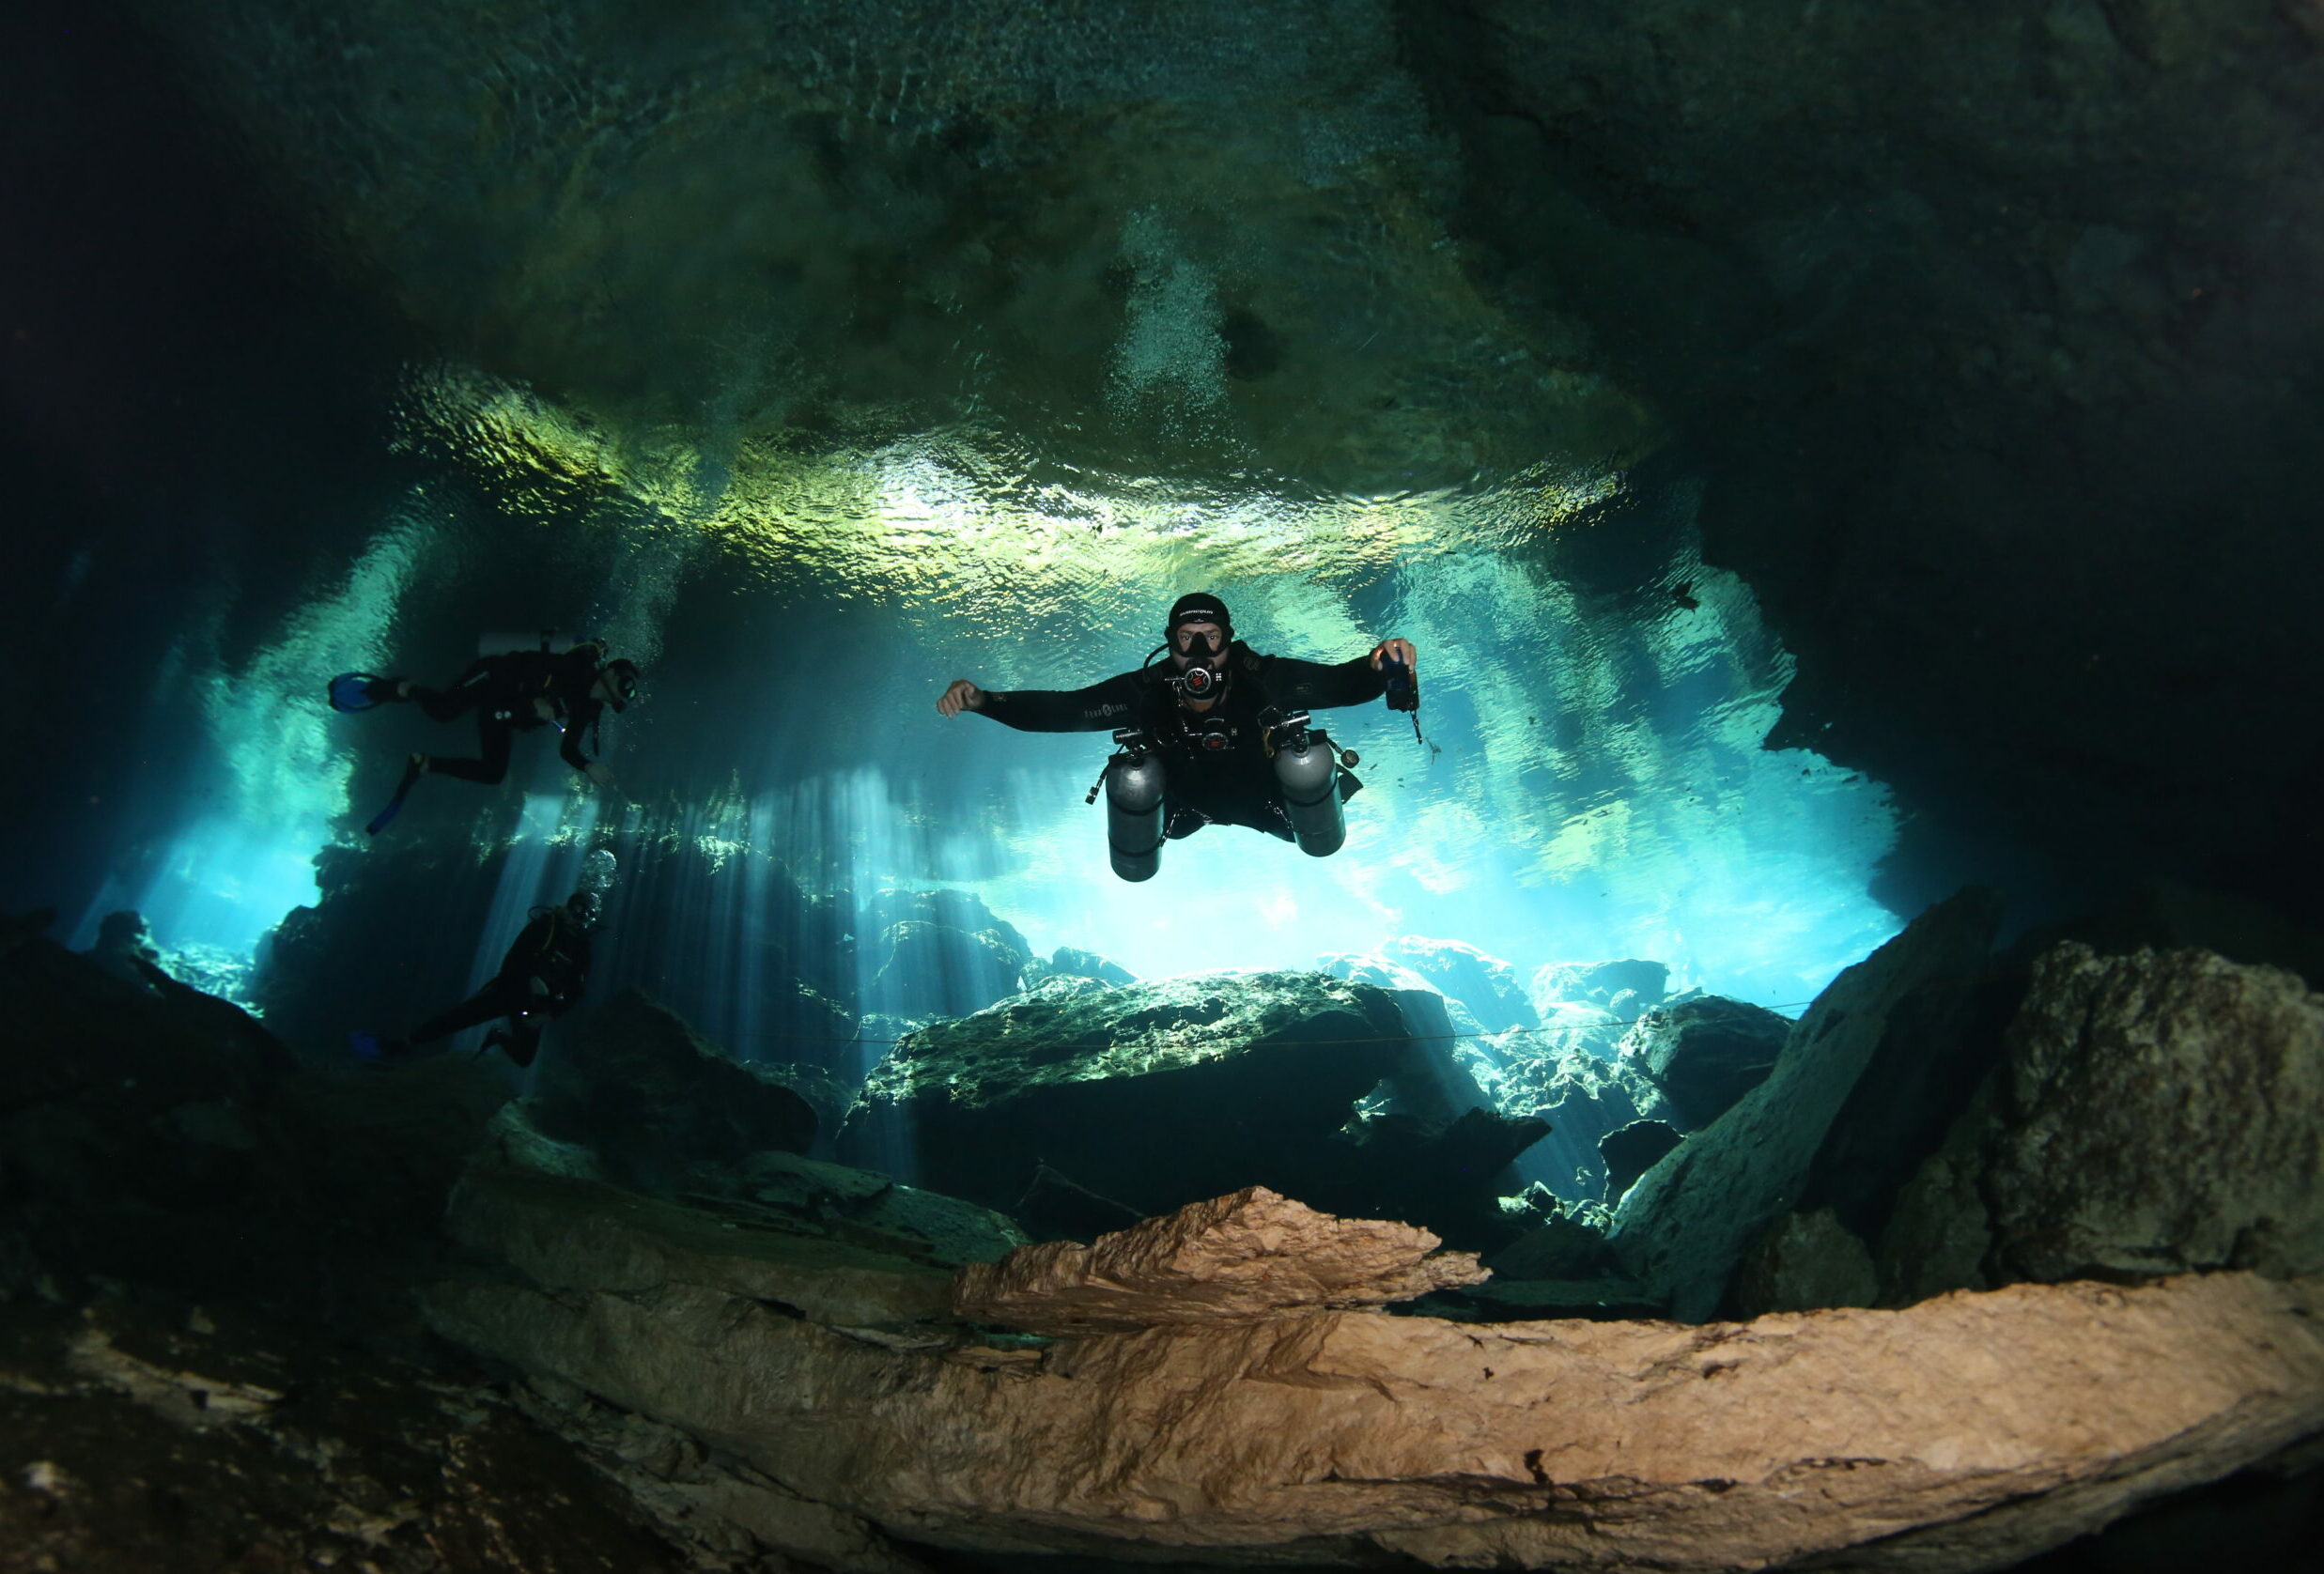 Scuba divers from Triton Diving experience the ethereal light beams of an underwater cave in Playa del Carmen